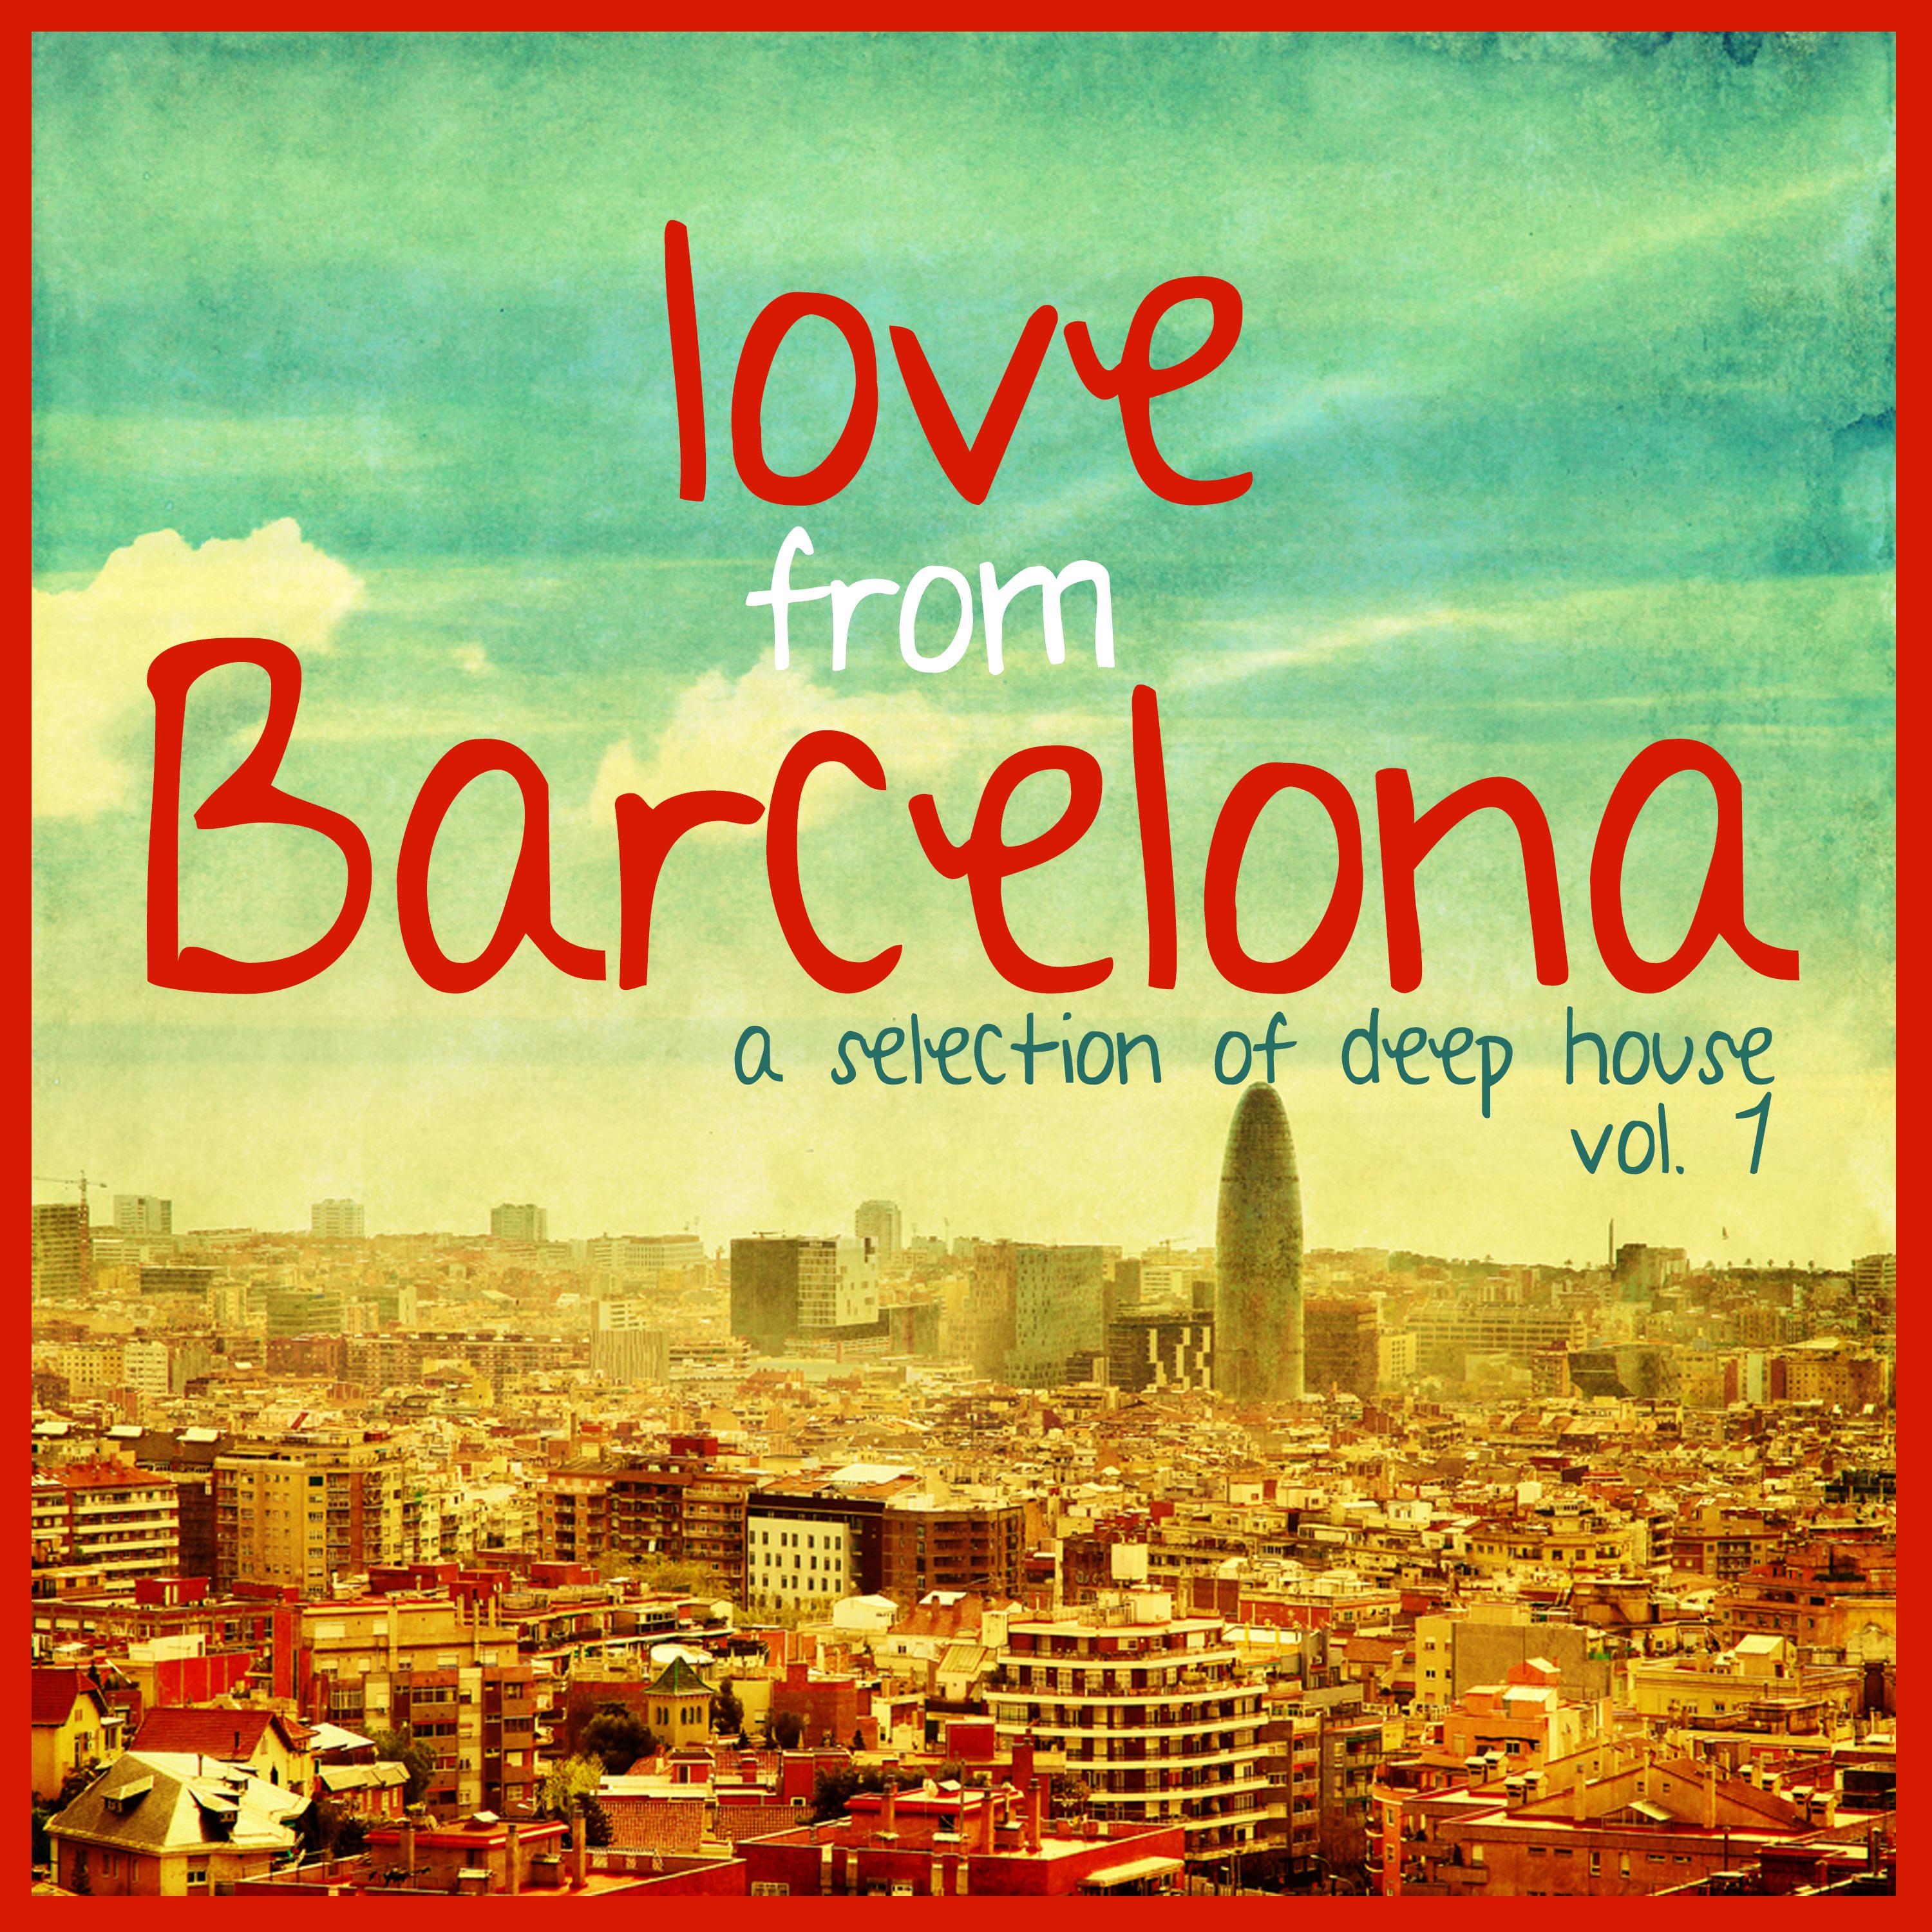 Love from Barcelona, Vol. 1 - Selection of Deep House